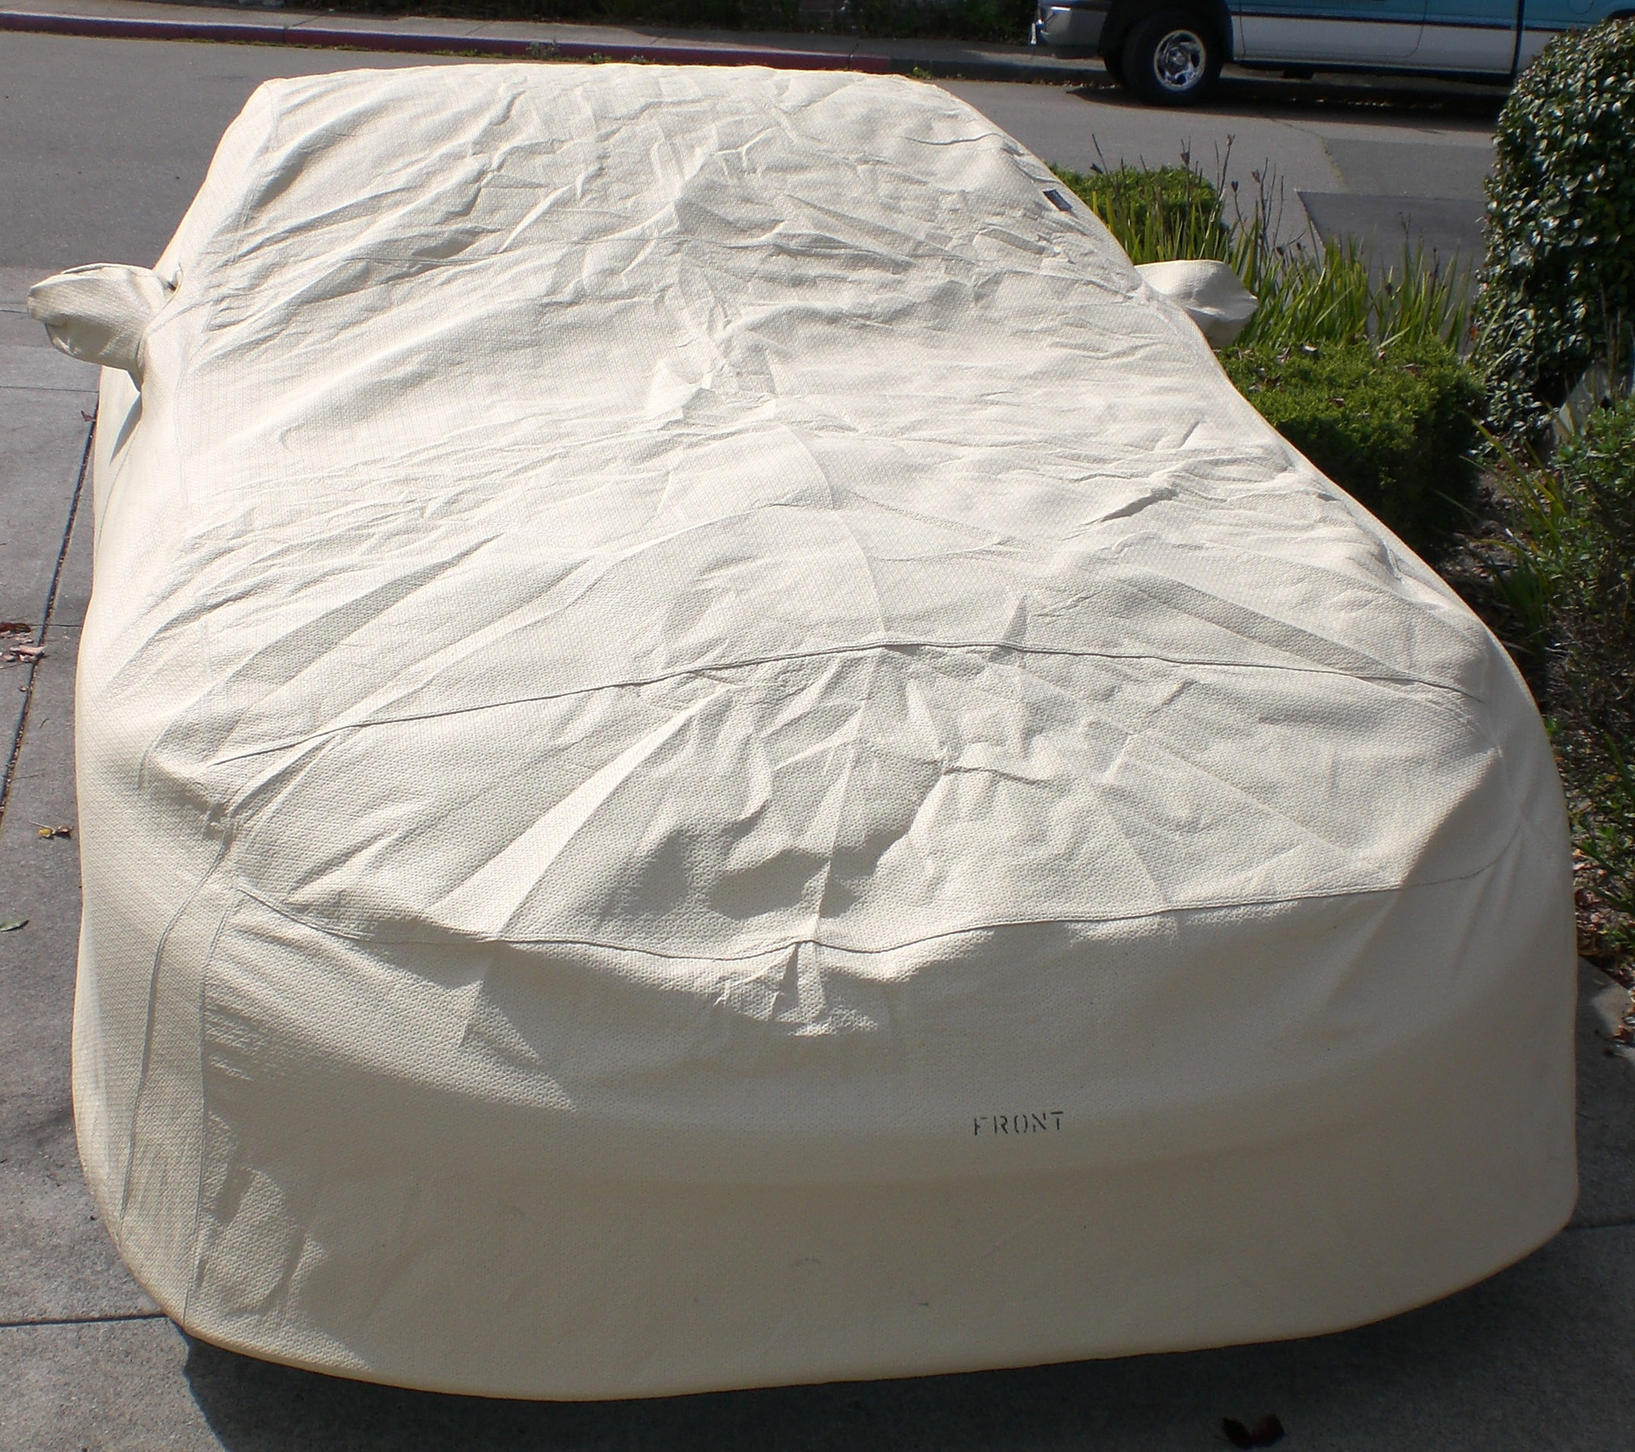 Nissan 350Z Nismo car covers